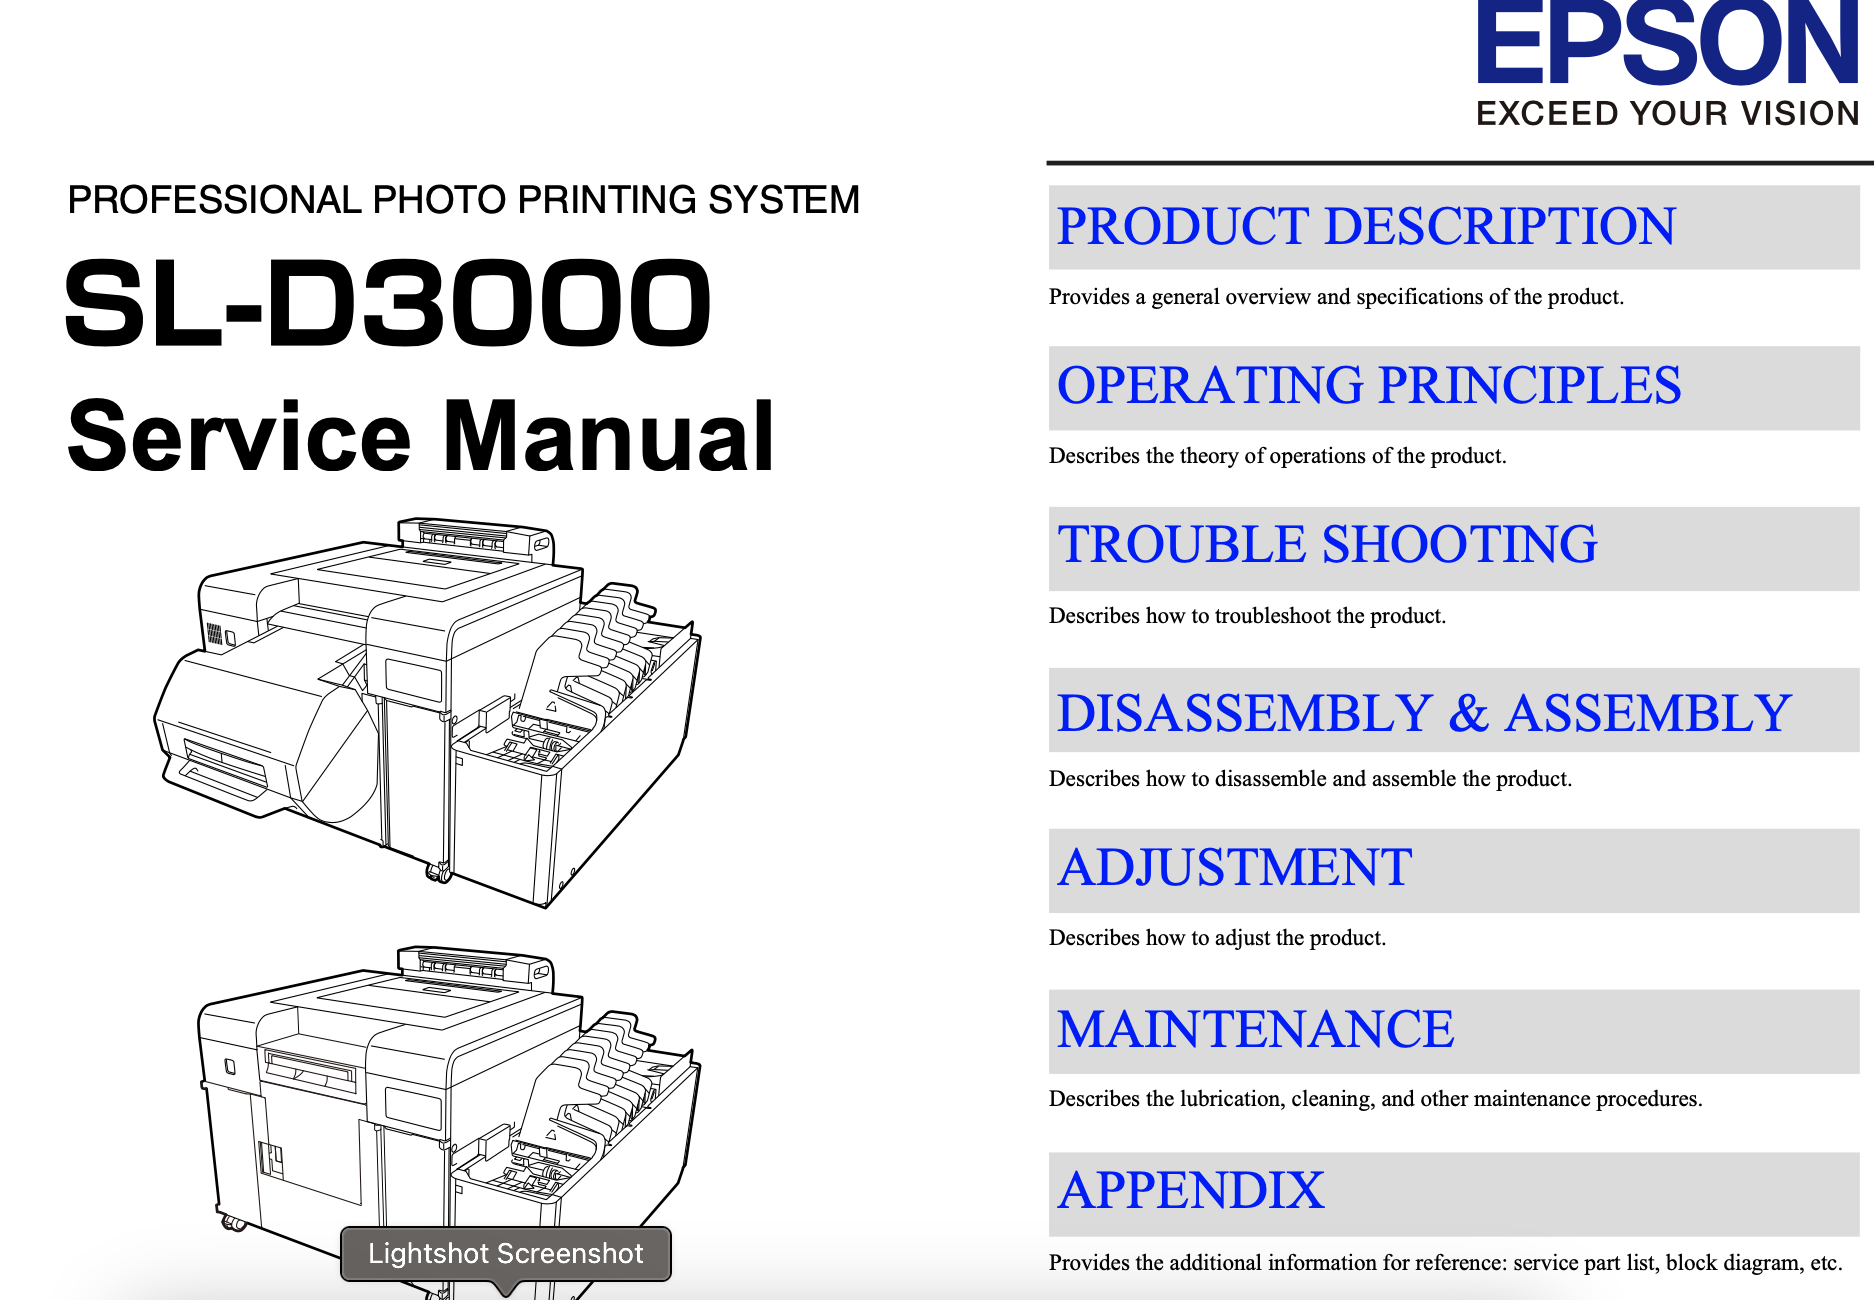 Epson <b>Sure Lab SL-D3000 </b> printer Service Manual, Exploded View, Wiring diagram and Parts List <font color=red>New!</font>